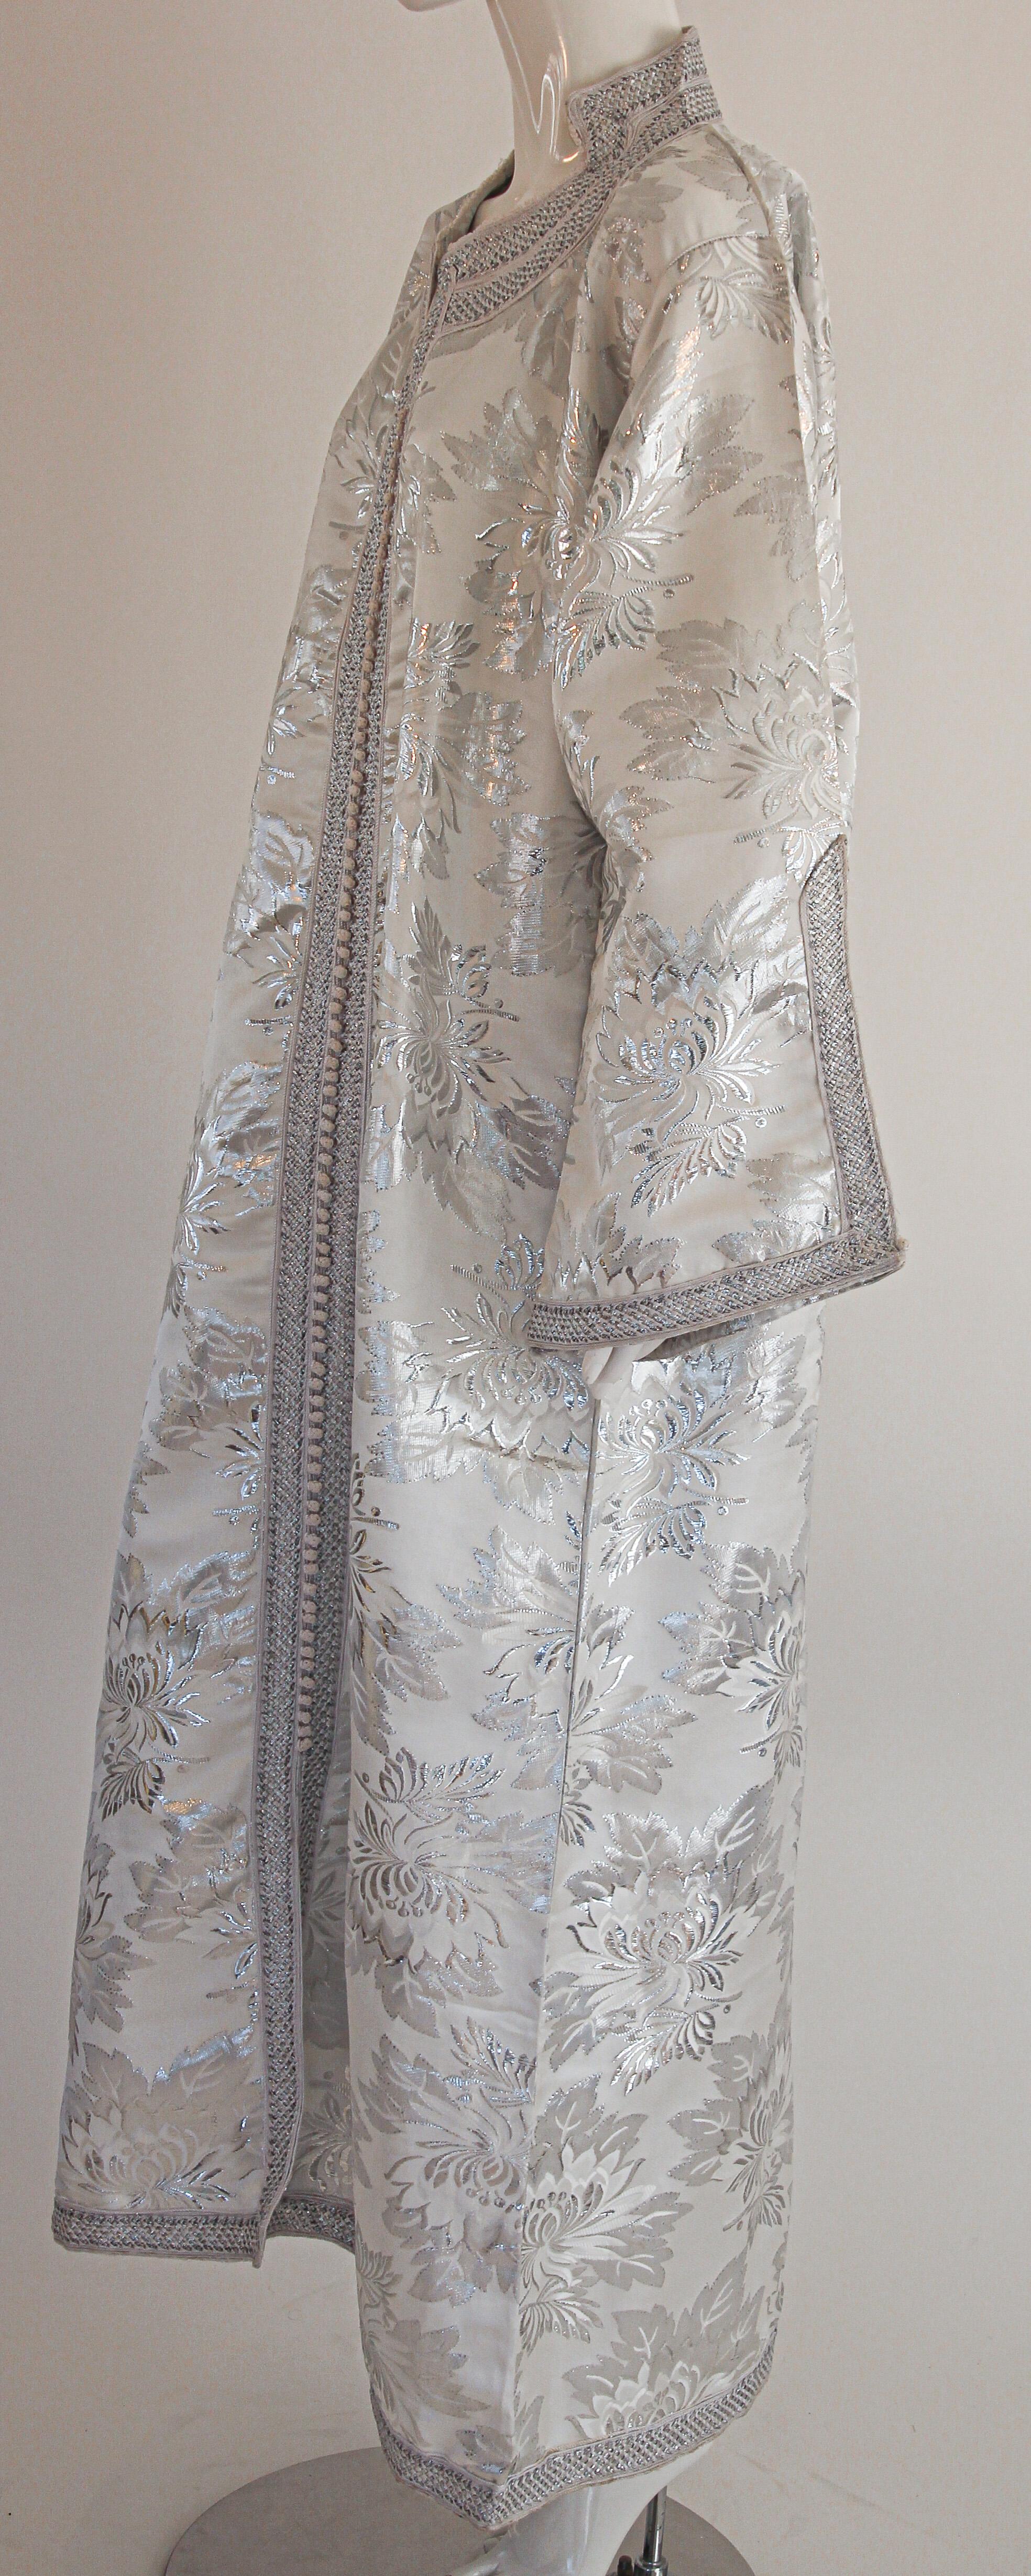 Moroccan Caftan Silver Damask Embroidered, Vintage, 1960s 9